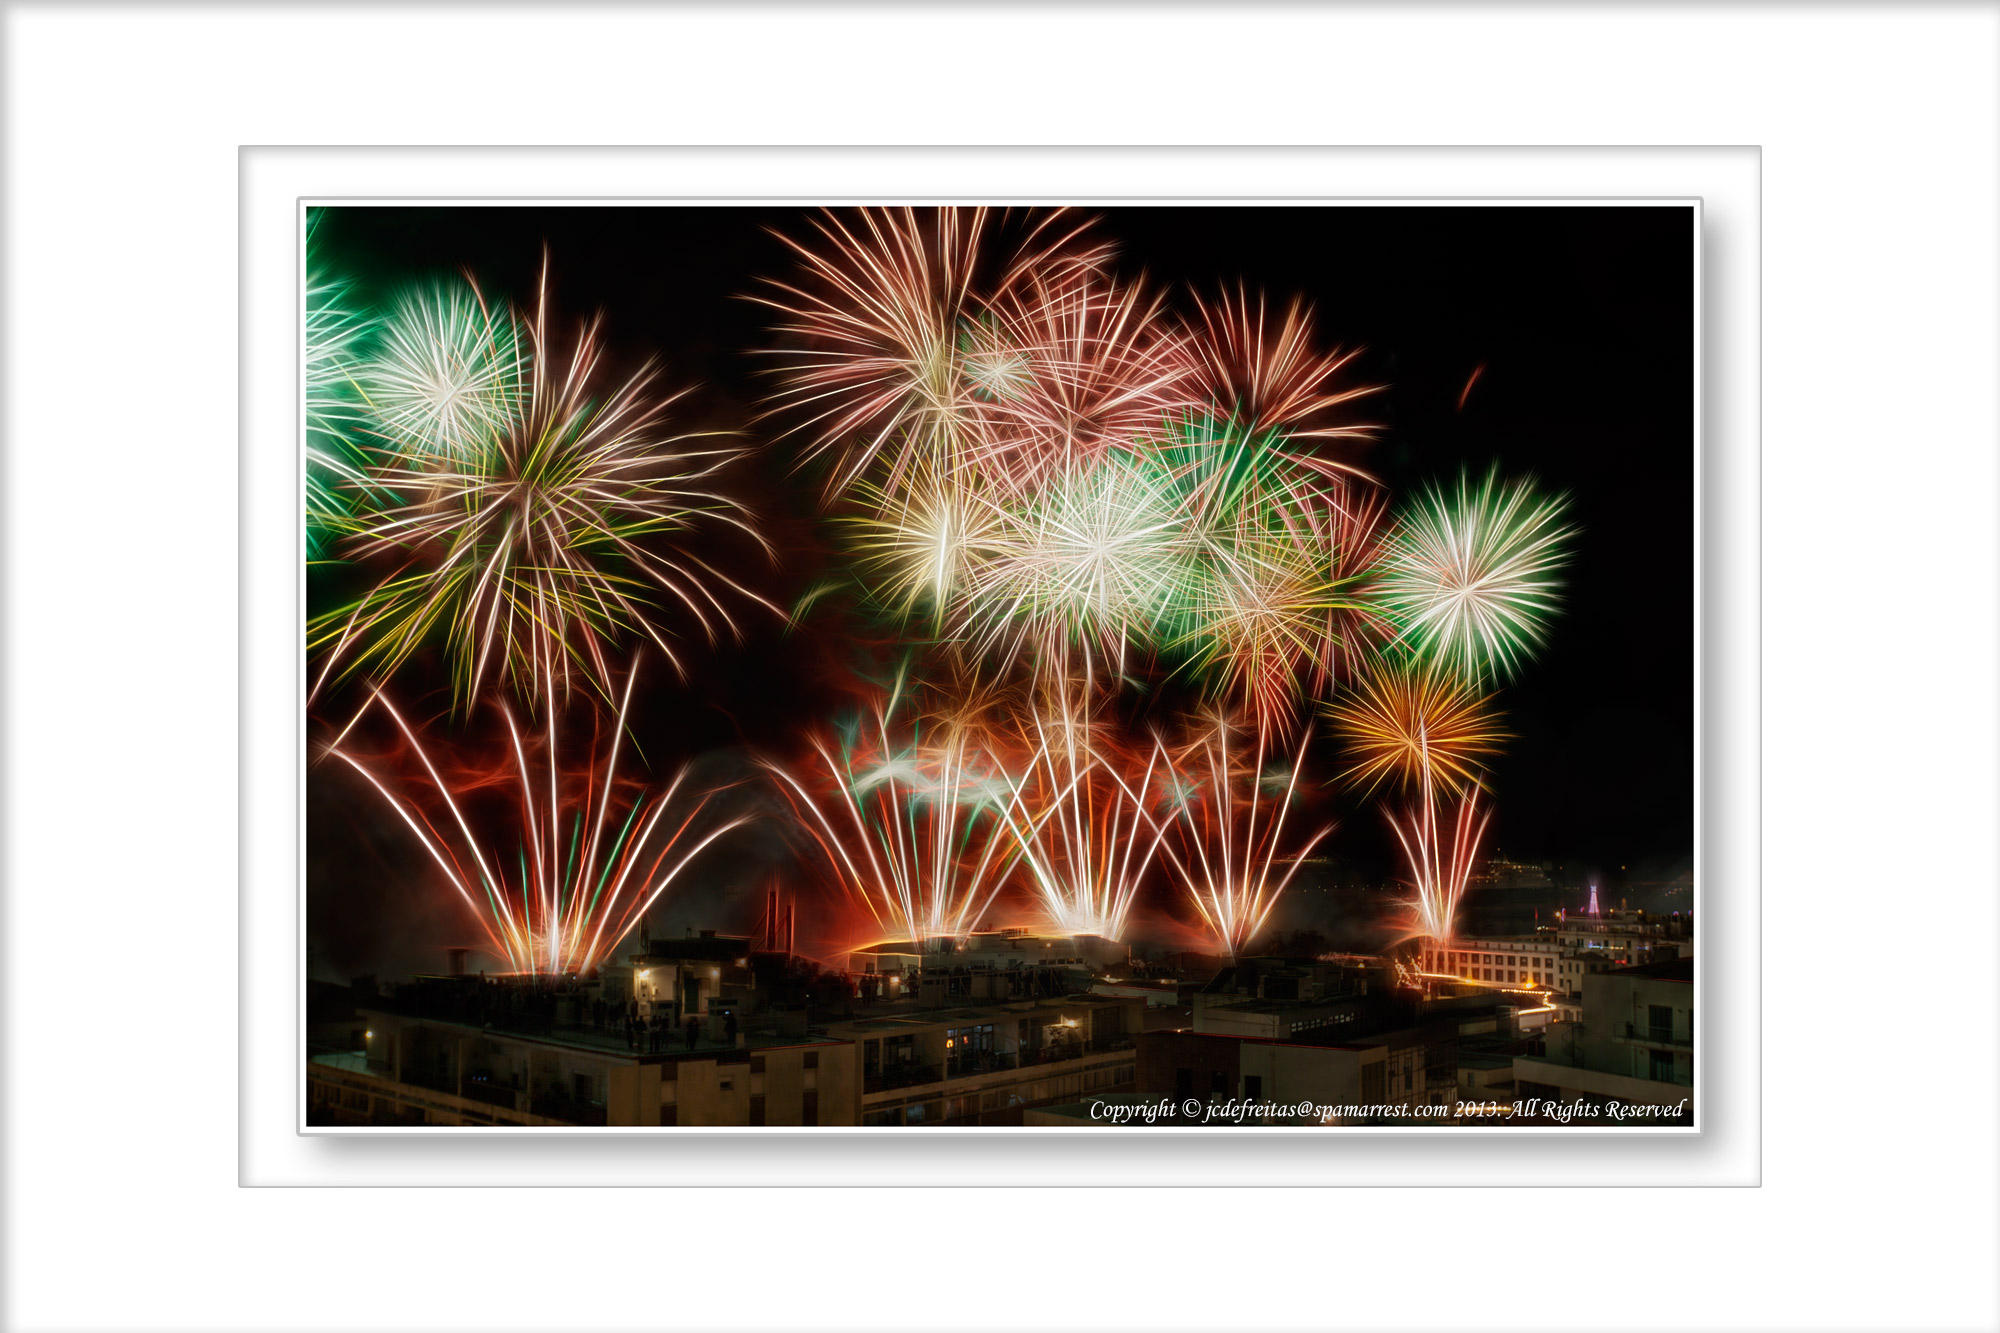 2014 - New Years Fireworks - Funchal, Madeira - Portugal